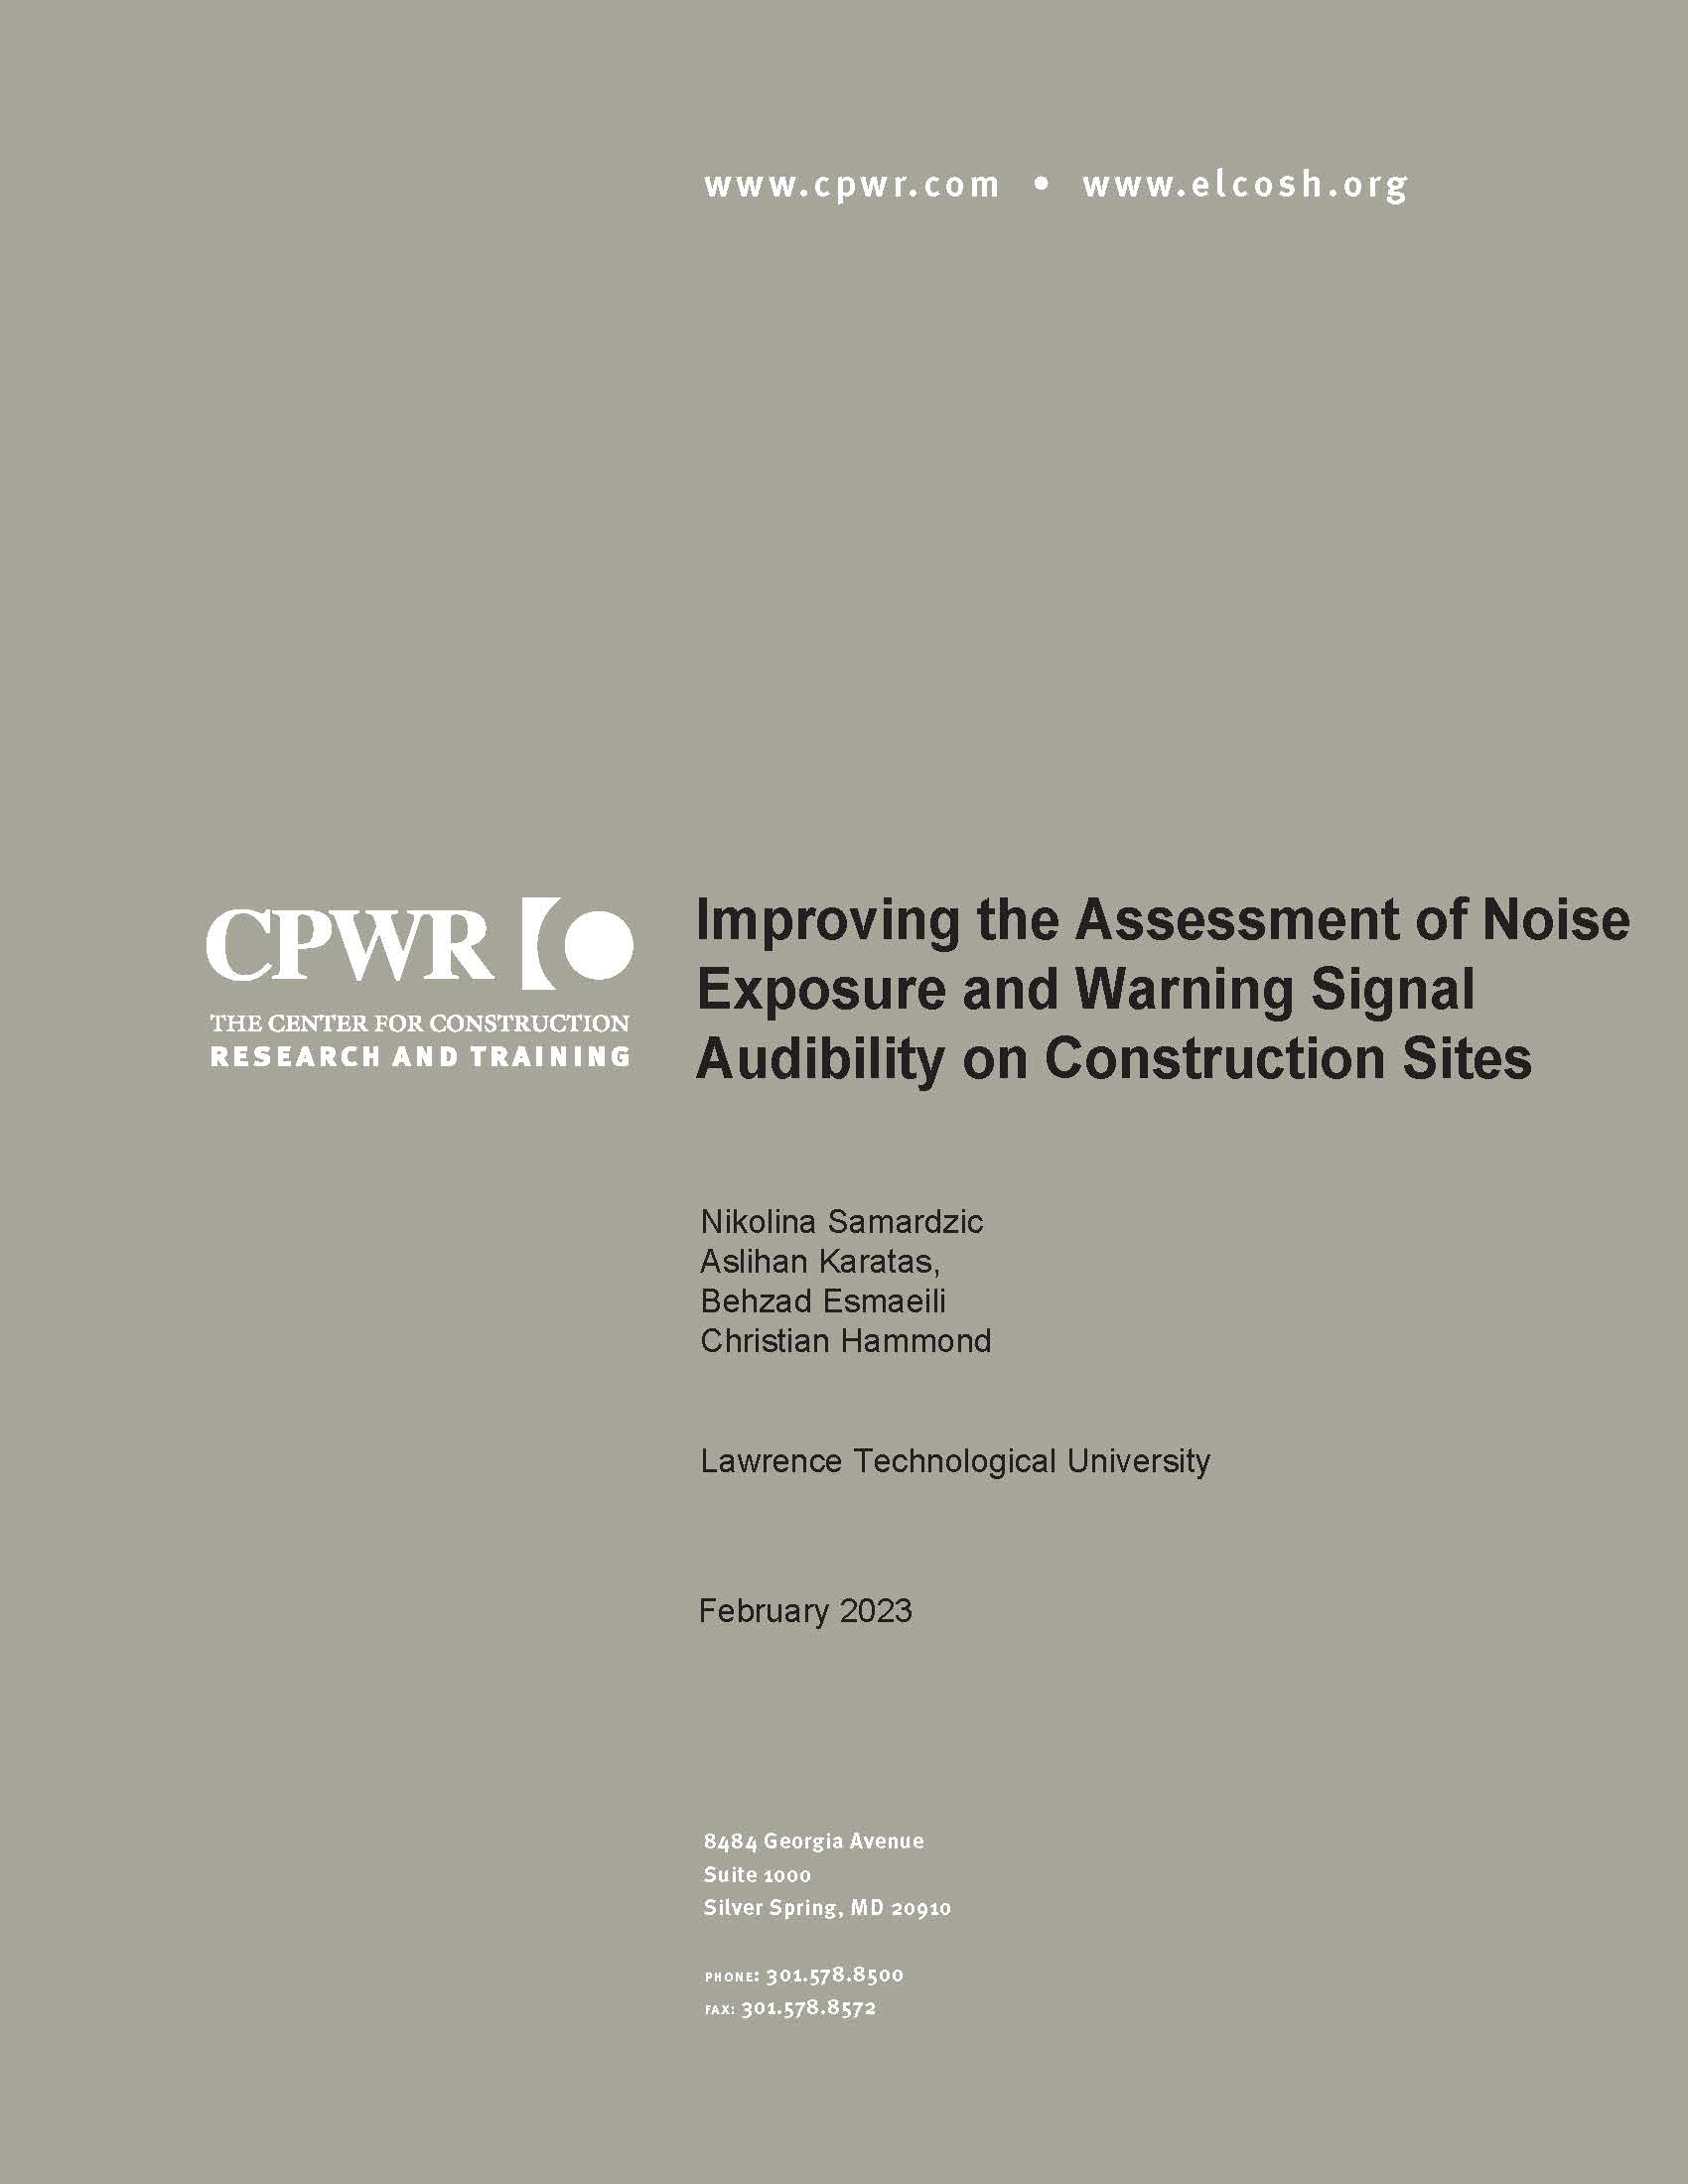 Improving the Assessment of Noise Exposure and Warning Signal Audibility on Construction Sites report cover with authors, university, and publication month and year.